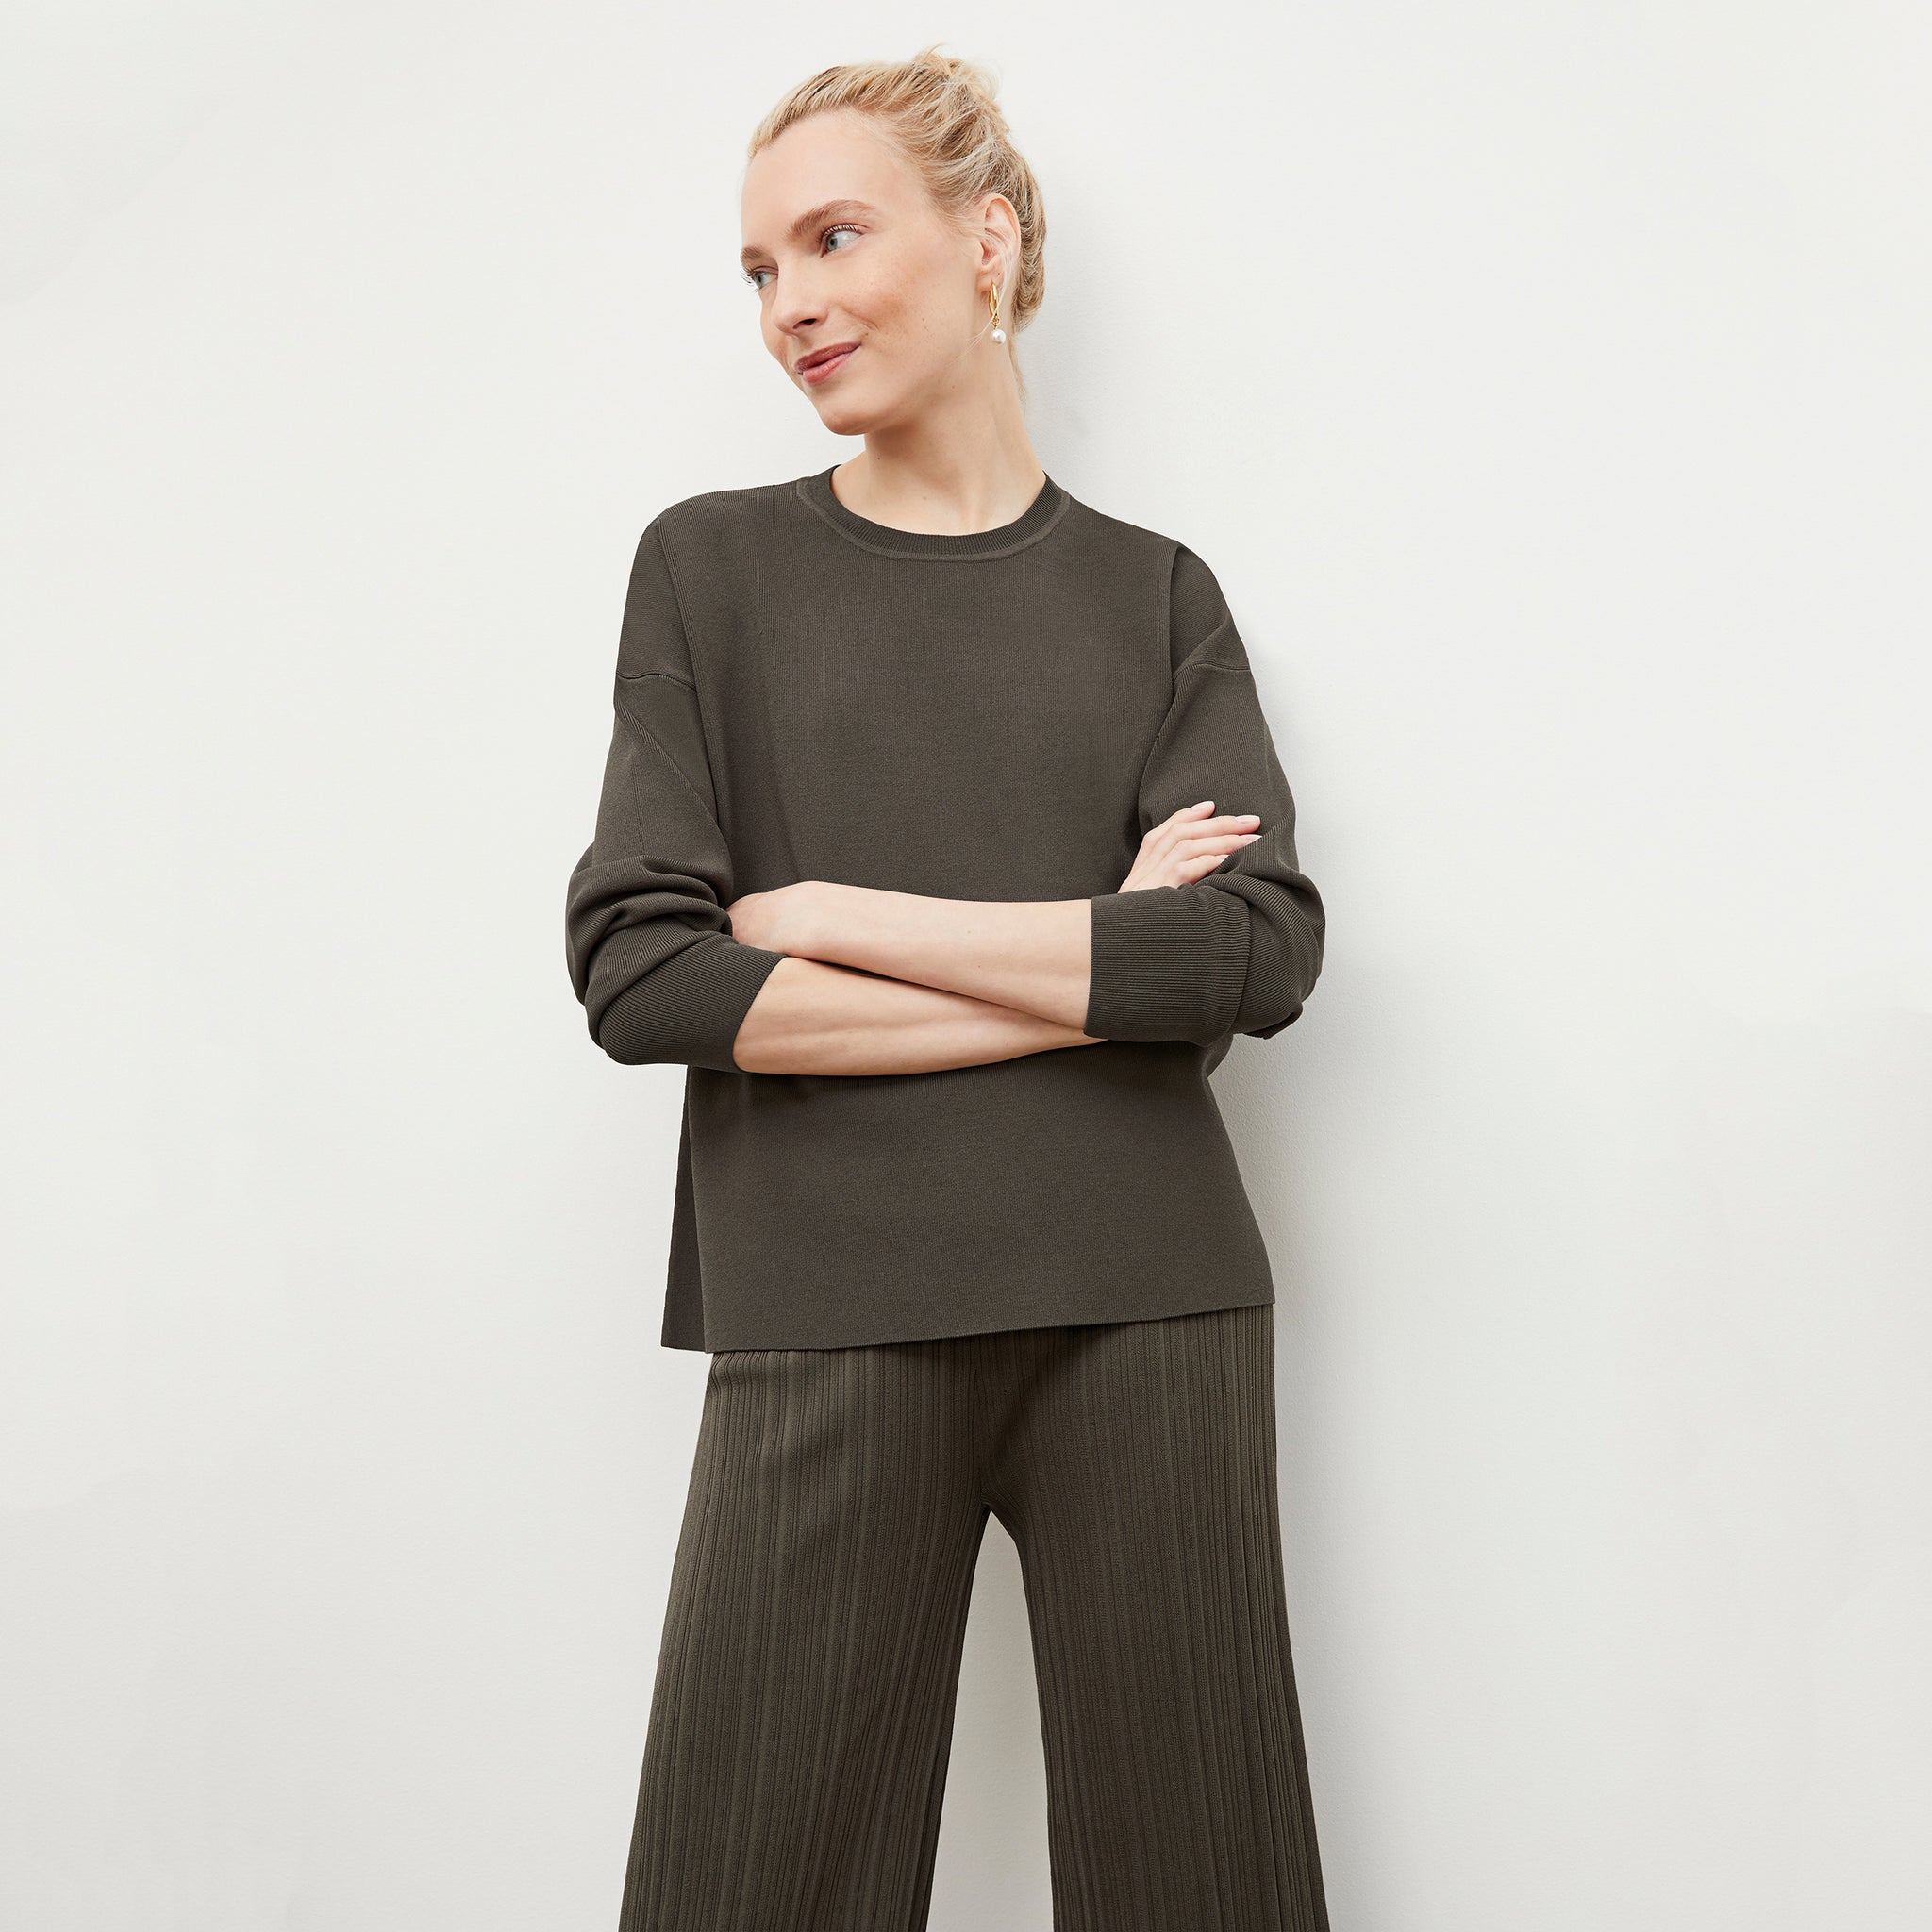 Front image of a woman wearing the Marijane Pant - Textured Knit in Light Ash